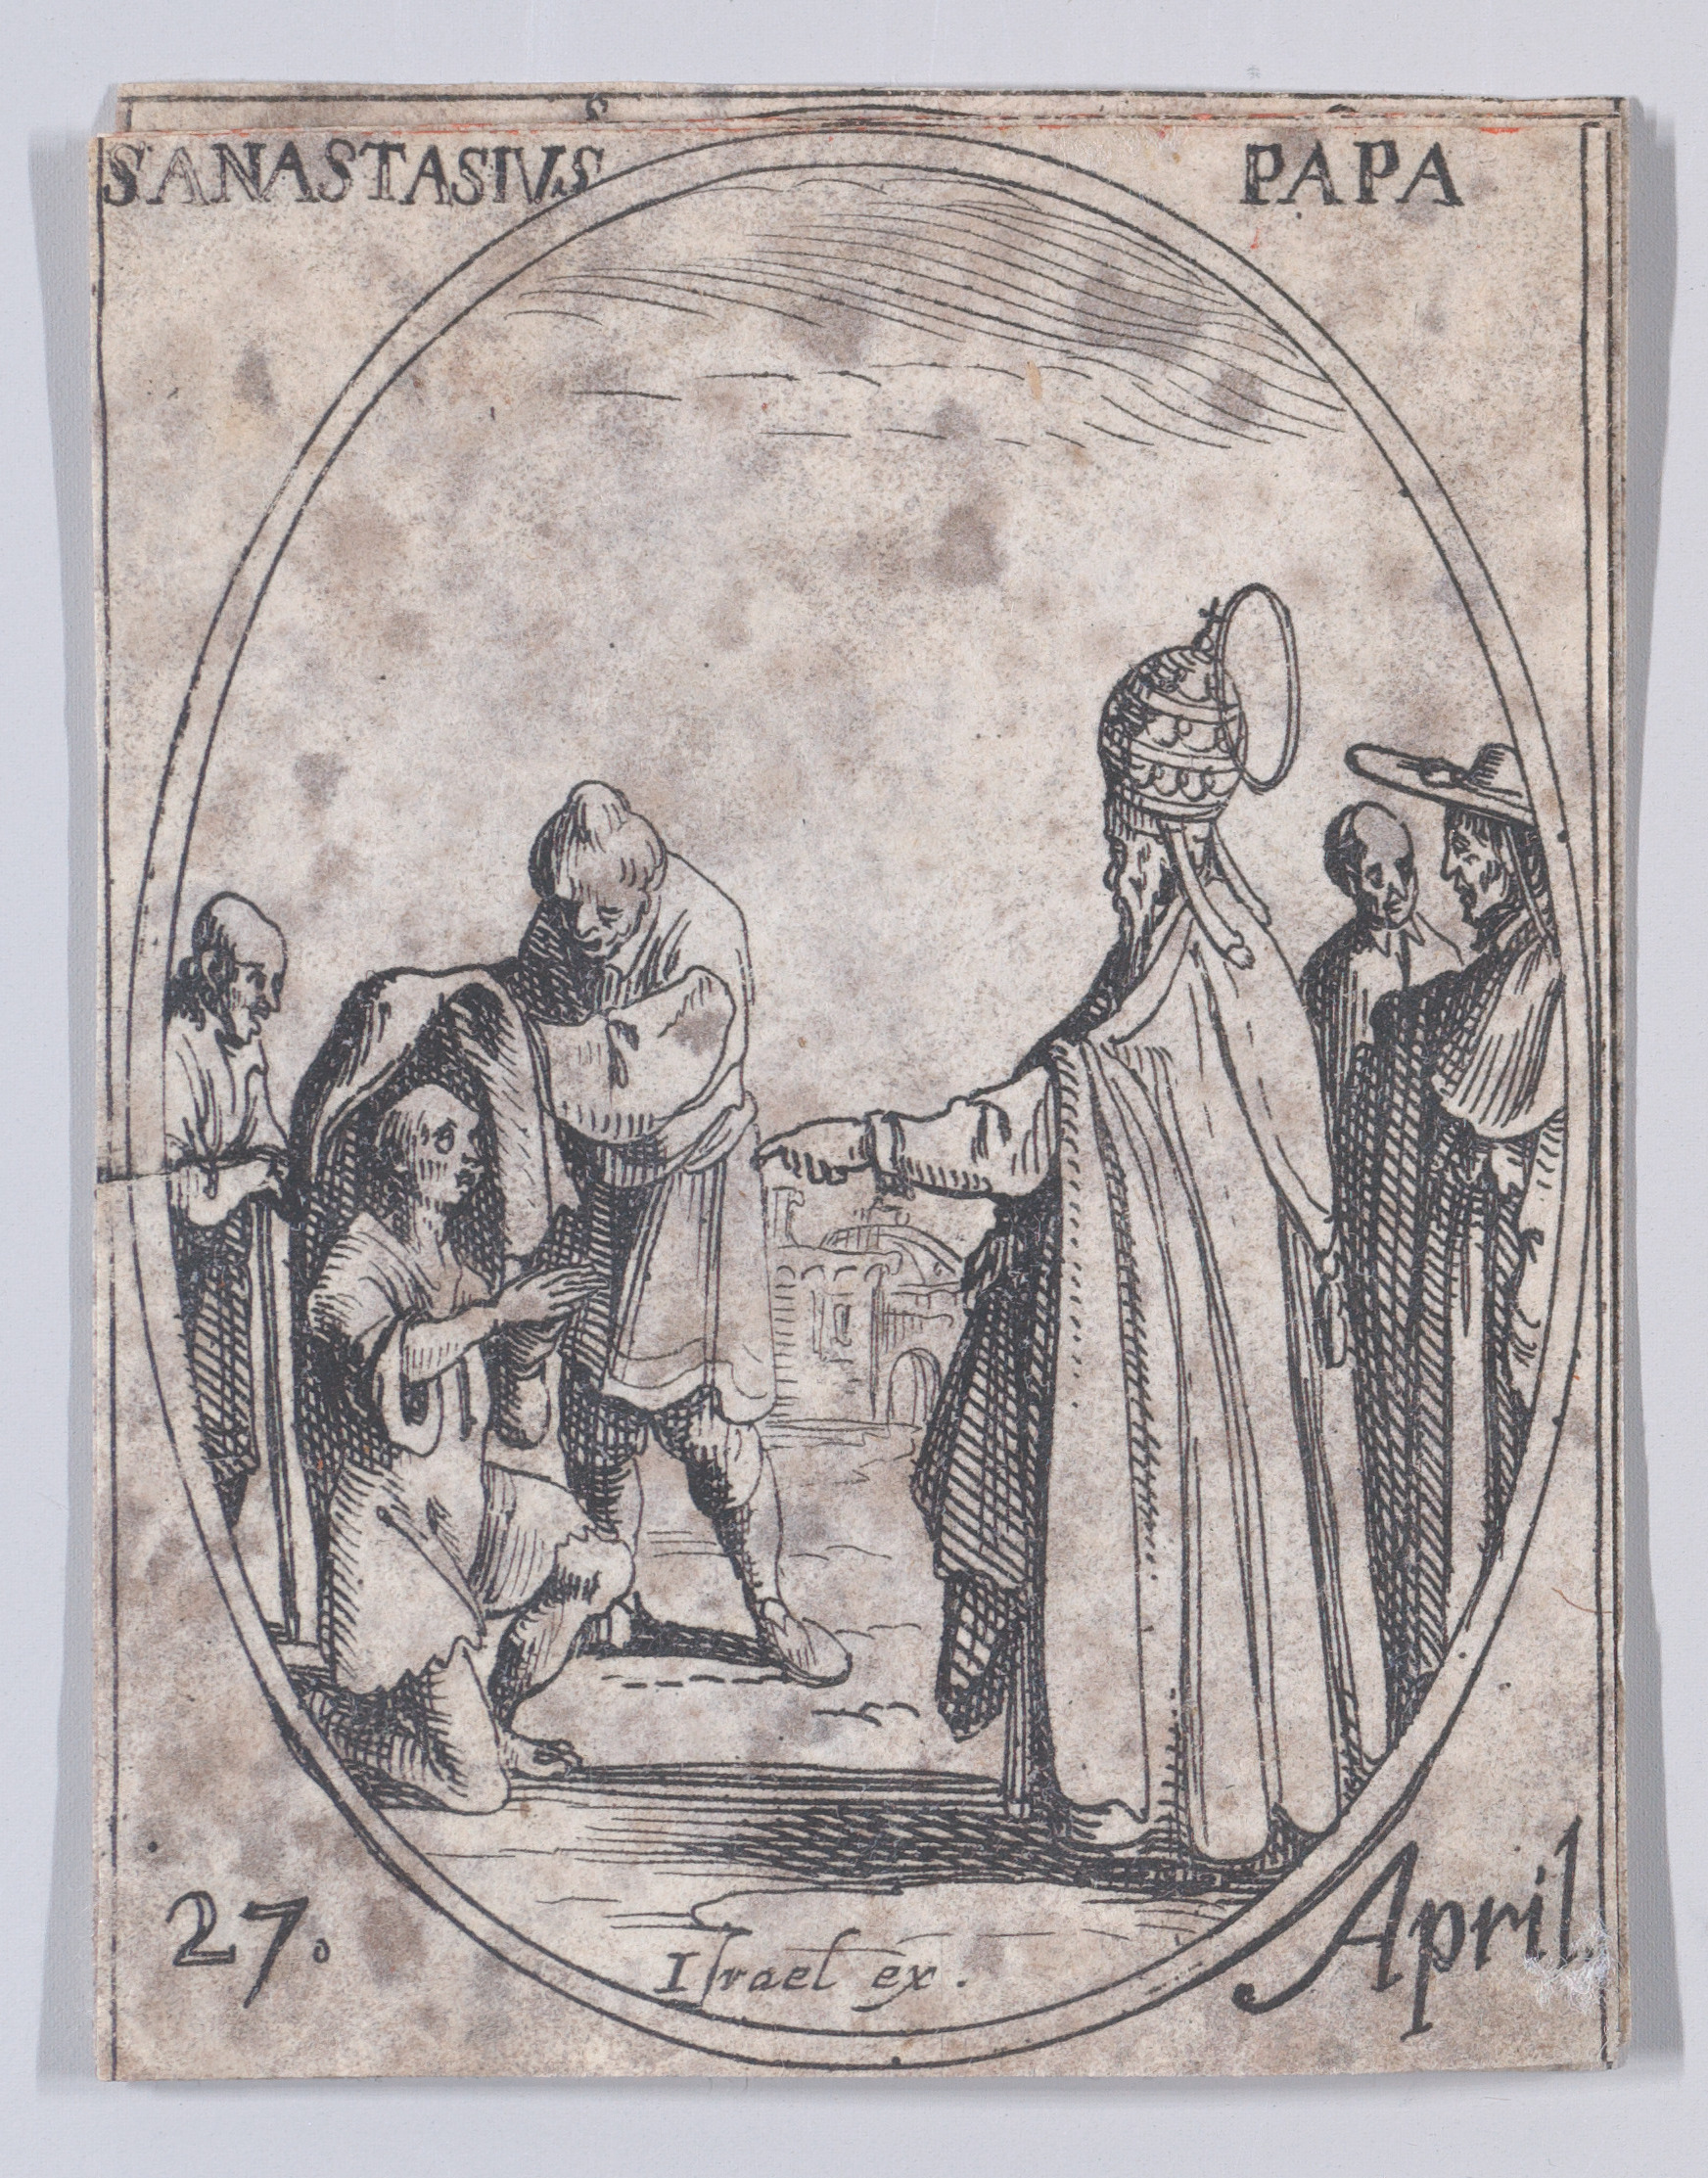 S. Anastase, pape (St. Anastasius, Pope), April 27th, from Les Images De Tous Les Saincts et Saintes de L'Année (Images of All of the Saints and Religious Events of the Year), Jacques Callot (French, Nancy 1592–1635 Nancy), Etching; second state of two (Lieure)